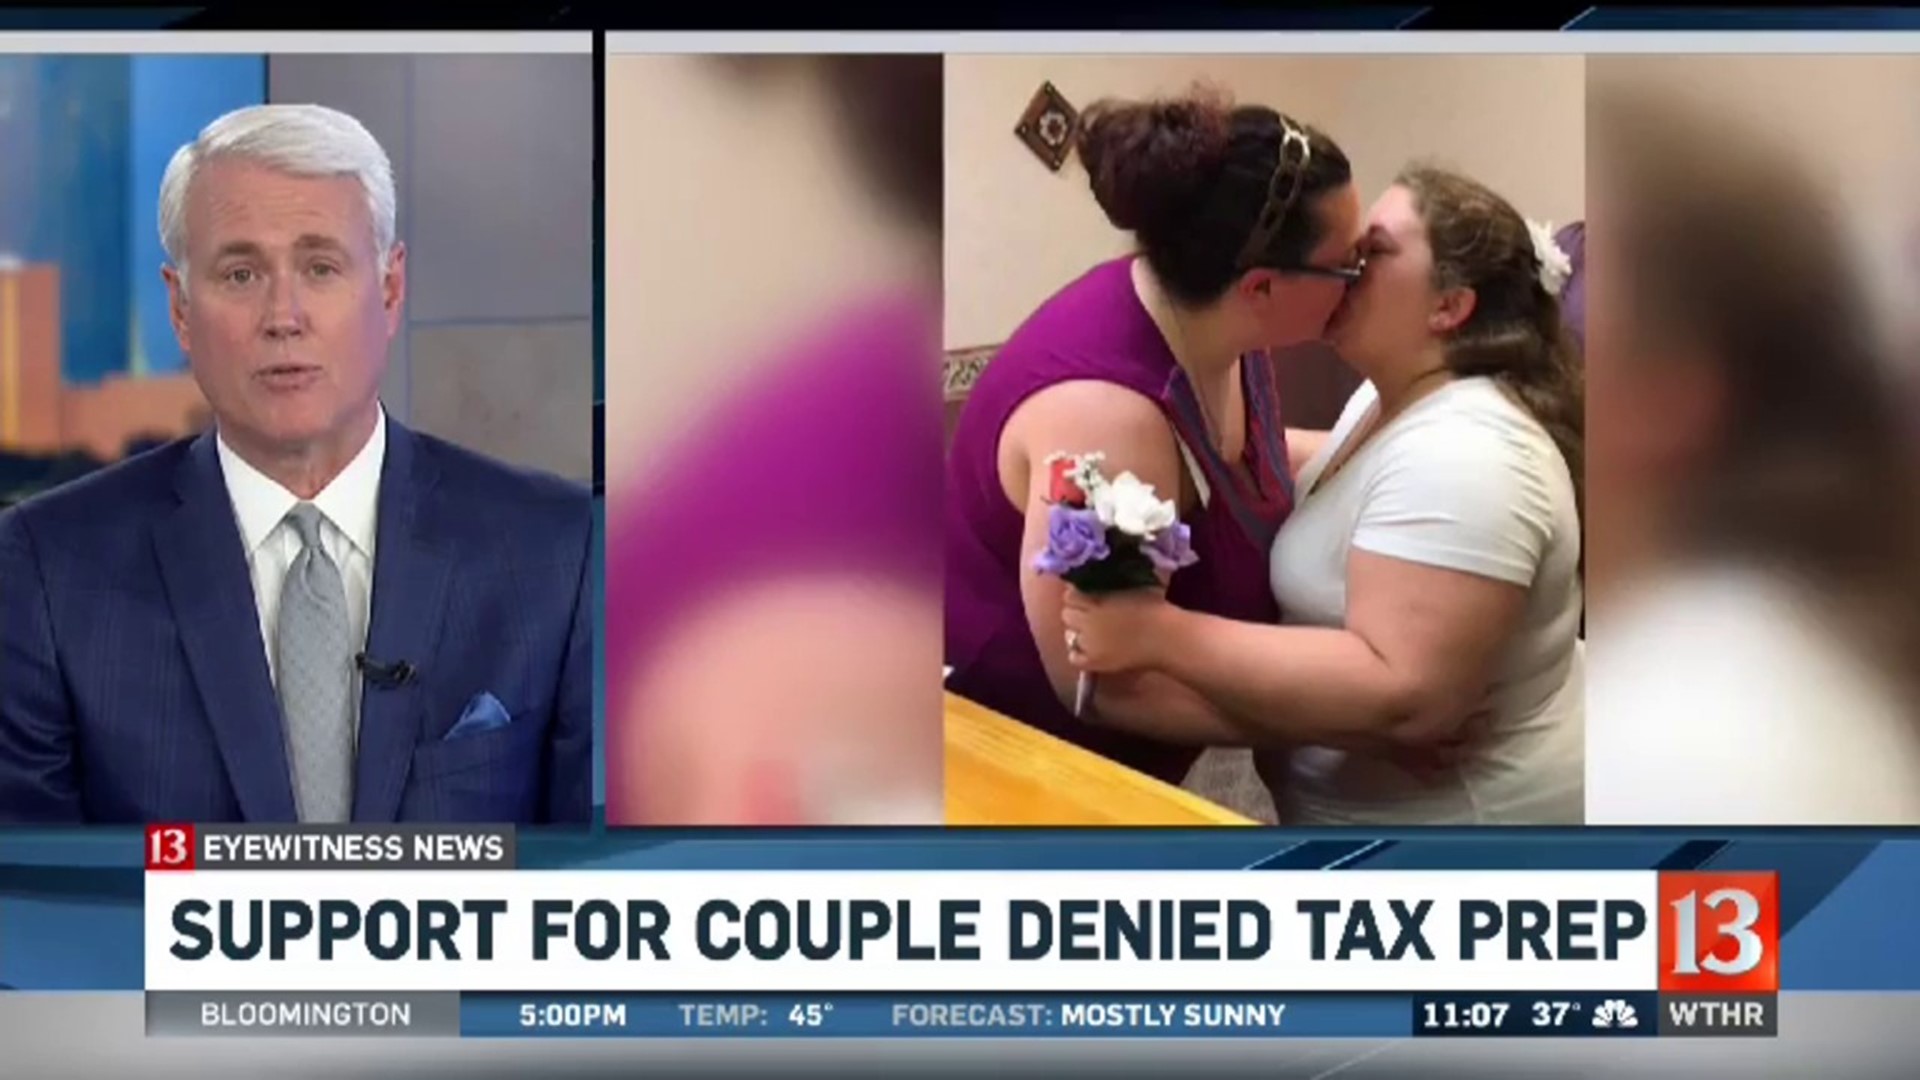 Russiaville Tax Couple Update